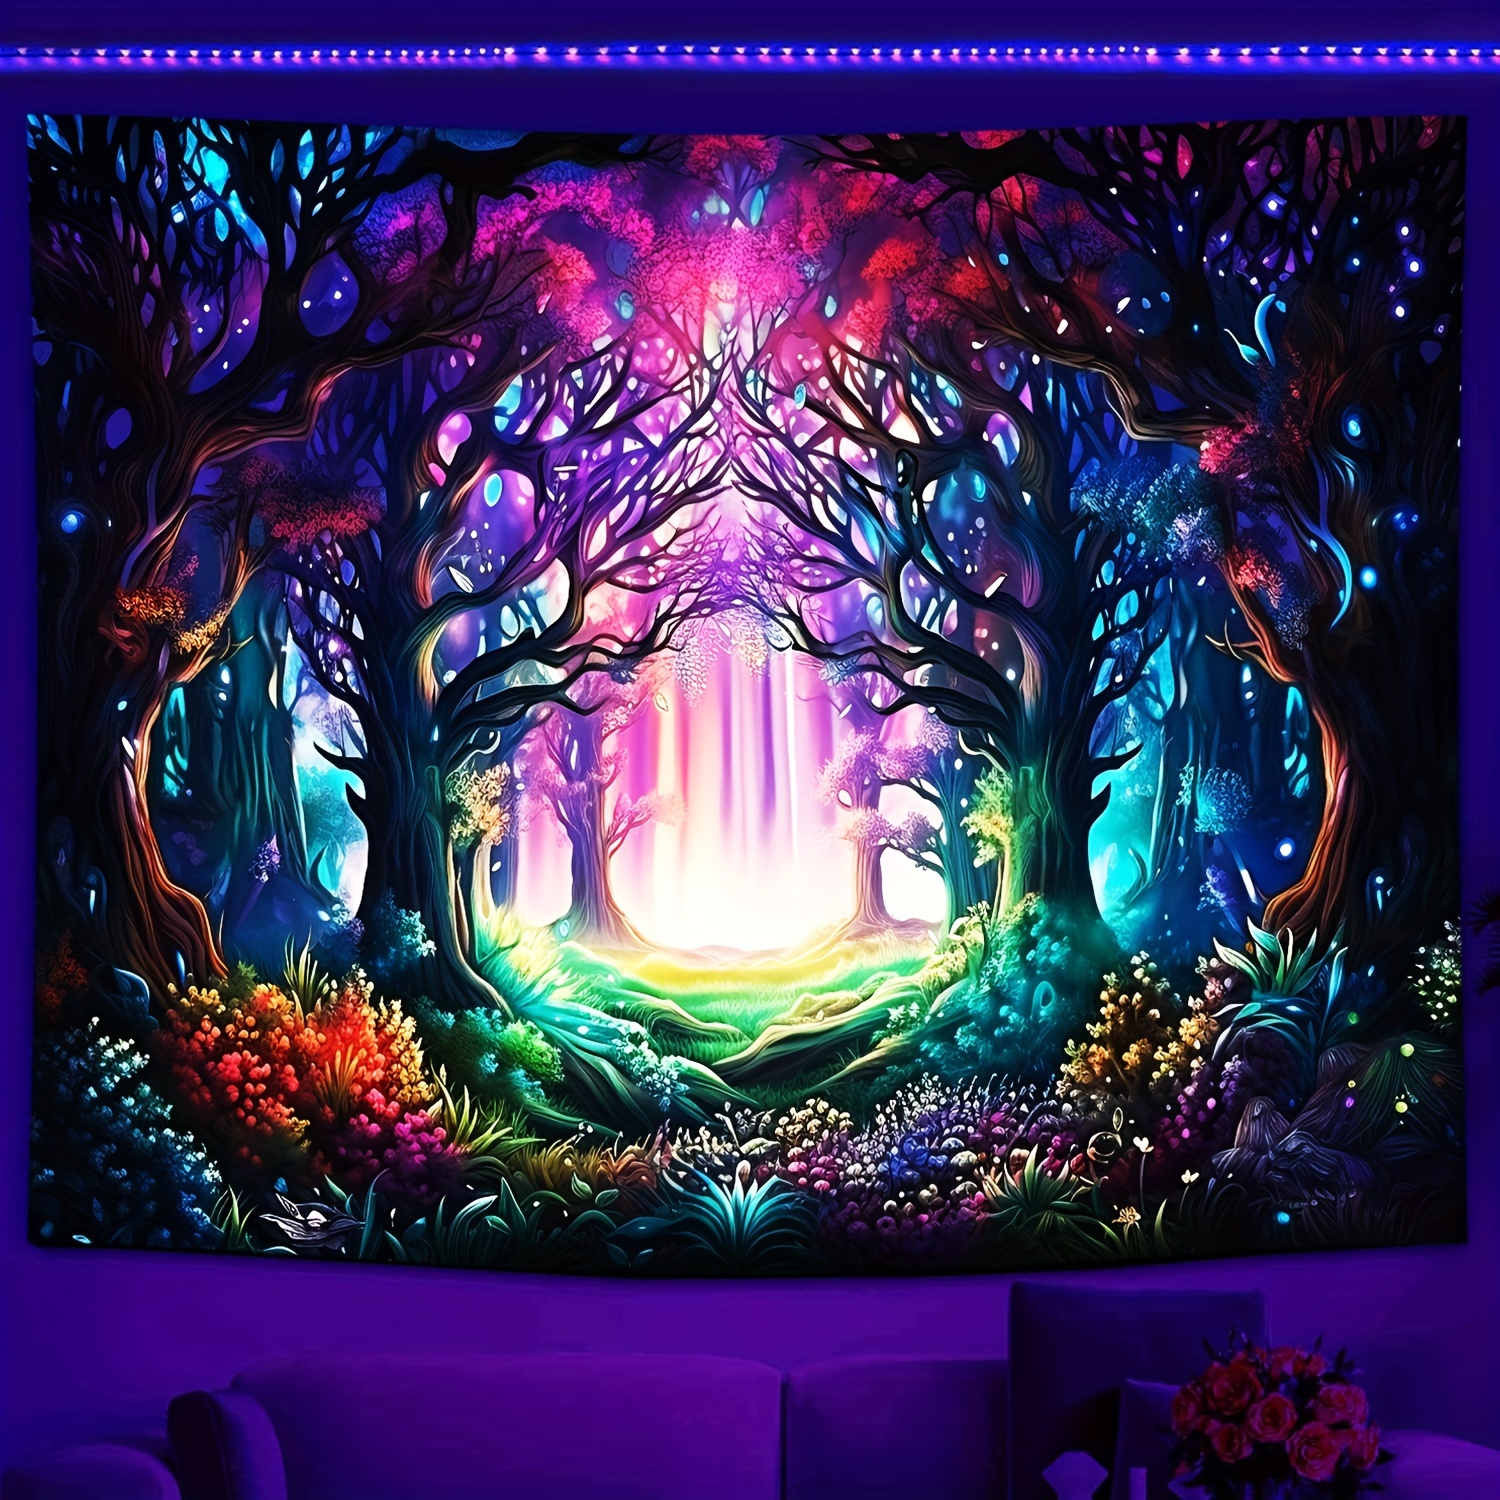 

Blacklight Fantasy Forest Magical Forest With Neon Lights Tapestry, Psychedelic Plant Tapestry Uv Reactive Nature Tree Tapestry Wall Hanging For Bedroom Living Room Backdrop Décor Eid Al-adha Mubarak